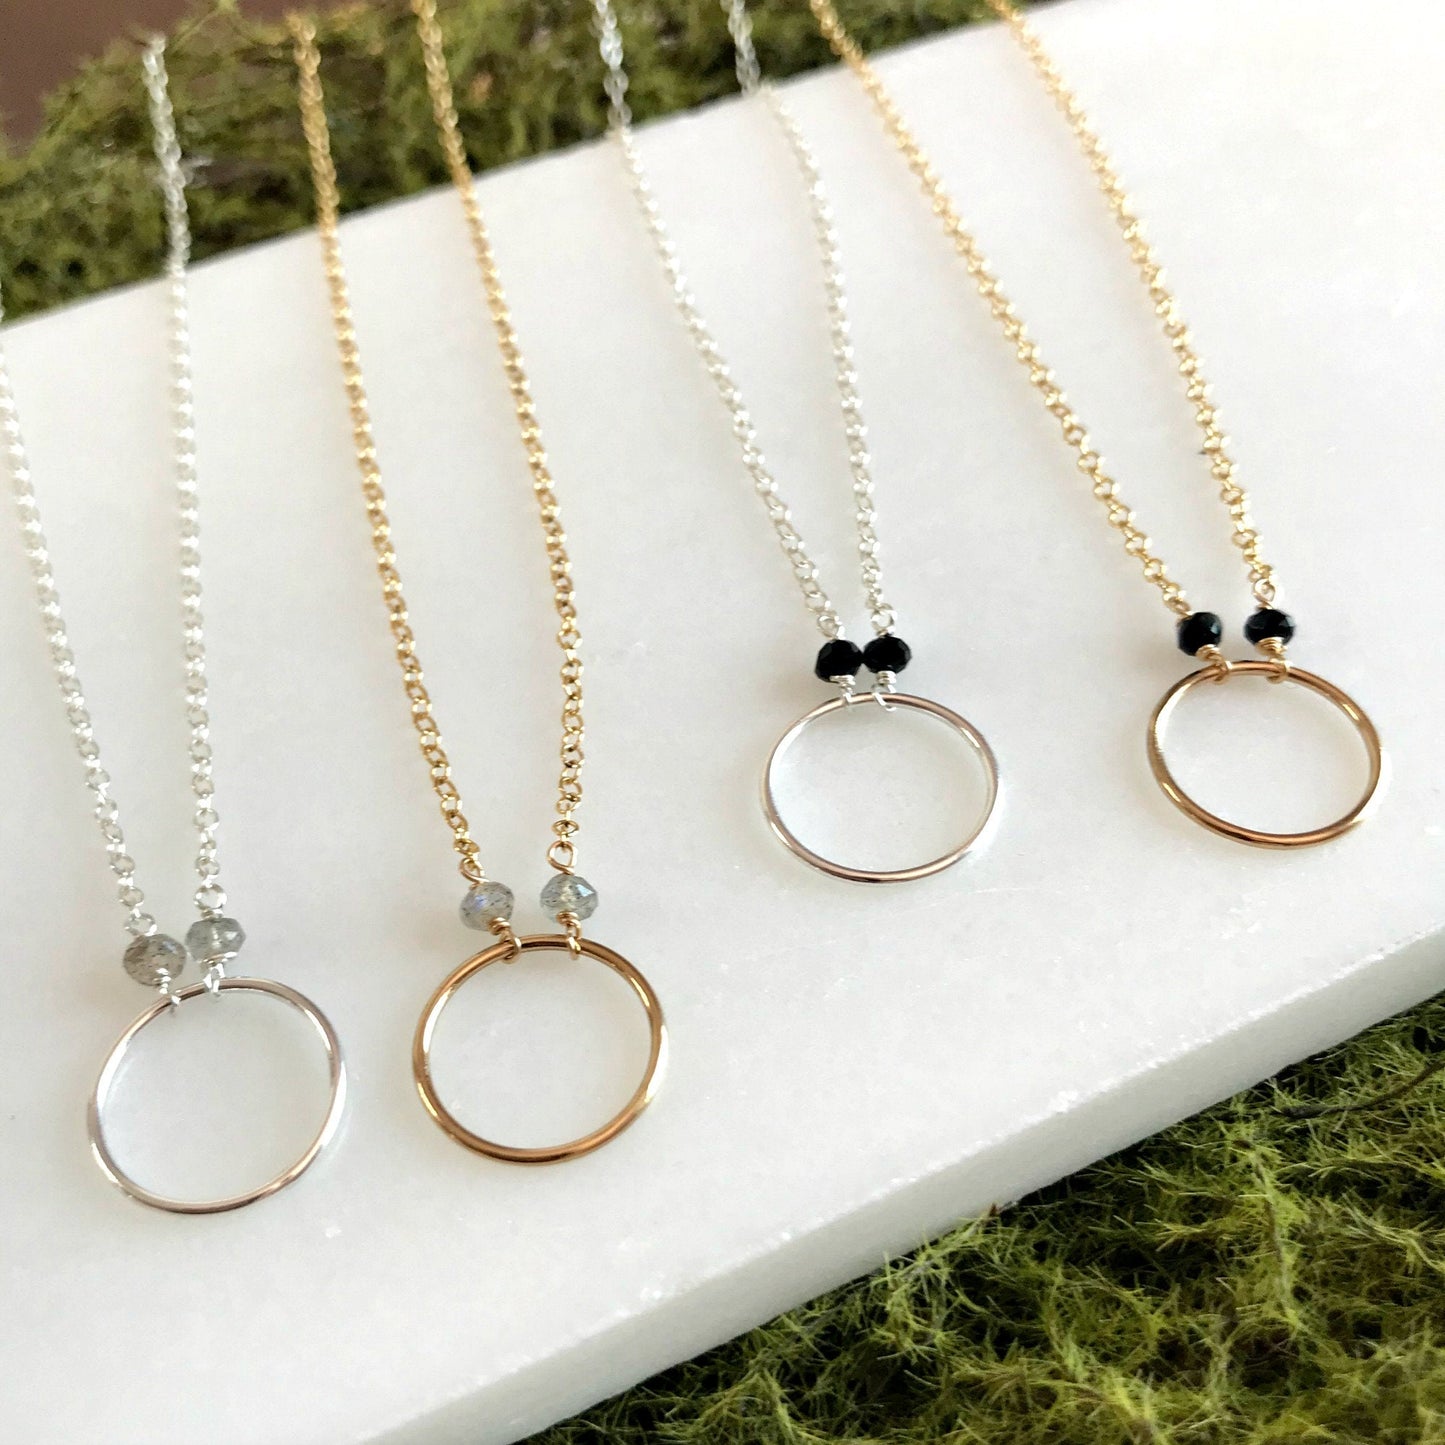 Karma Necklace Circle Necklace Delicate Necklace Eternity Necklace Minimalist Necklace Boho Necklace Infinity Necklace Gift for Mother